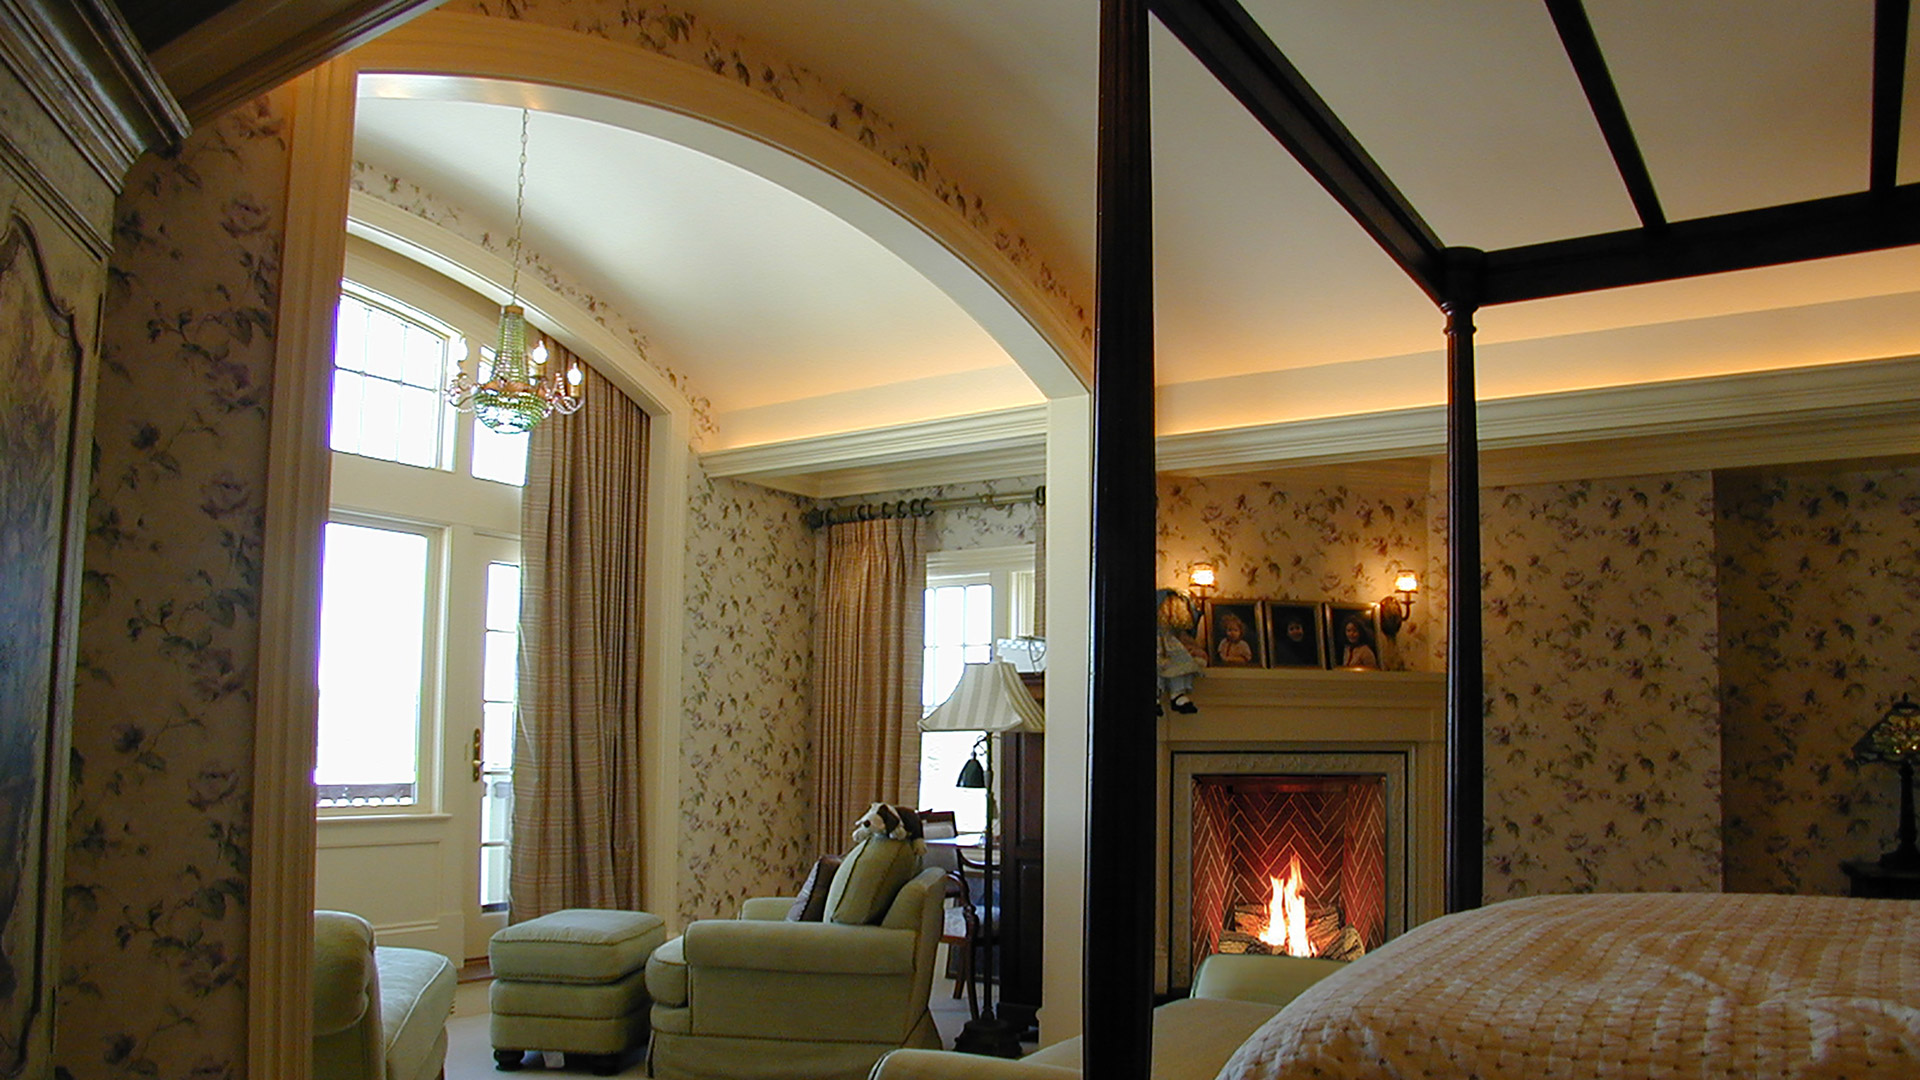 Concord Massachusetts master bedroom fireplace and barrel vaulted ceiling